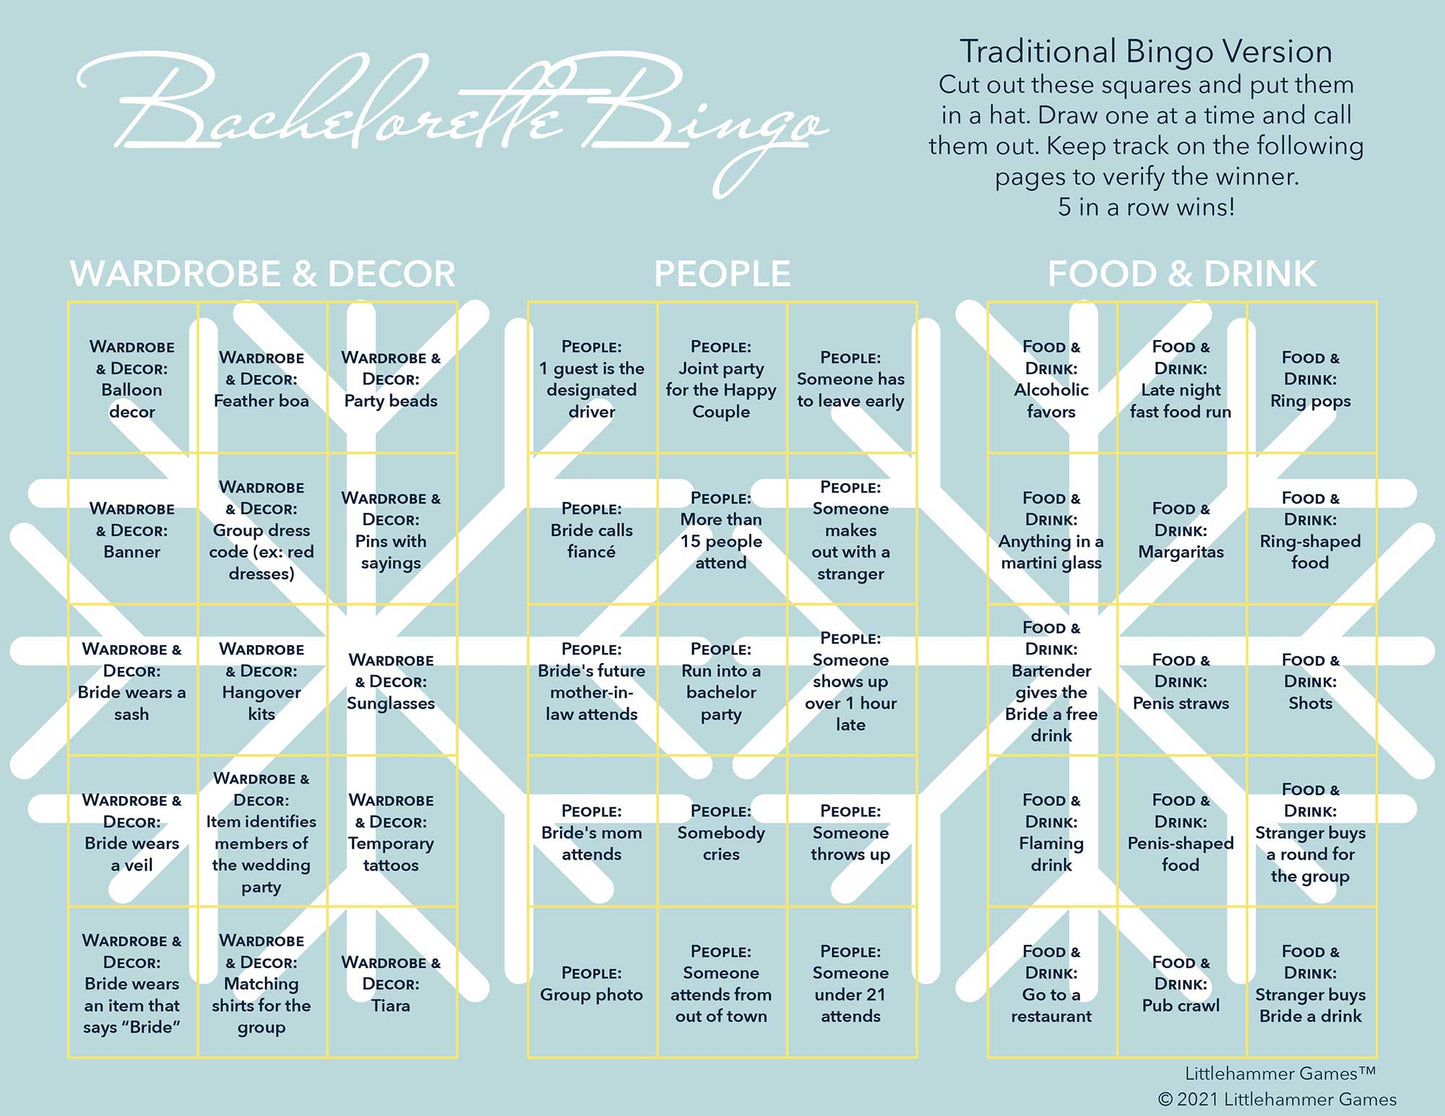 Bachelorette Bingo calling card with a blue and white snowflake background